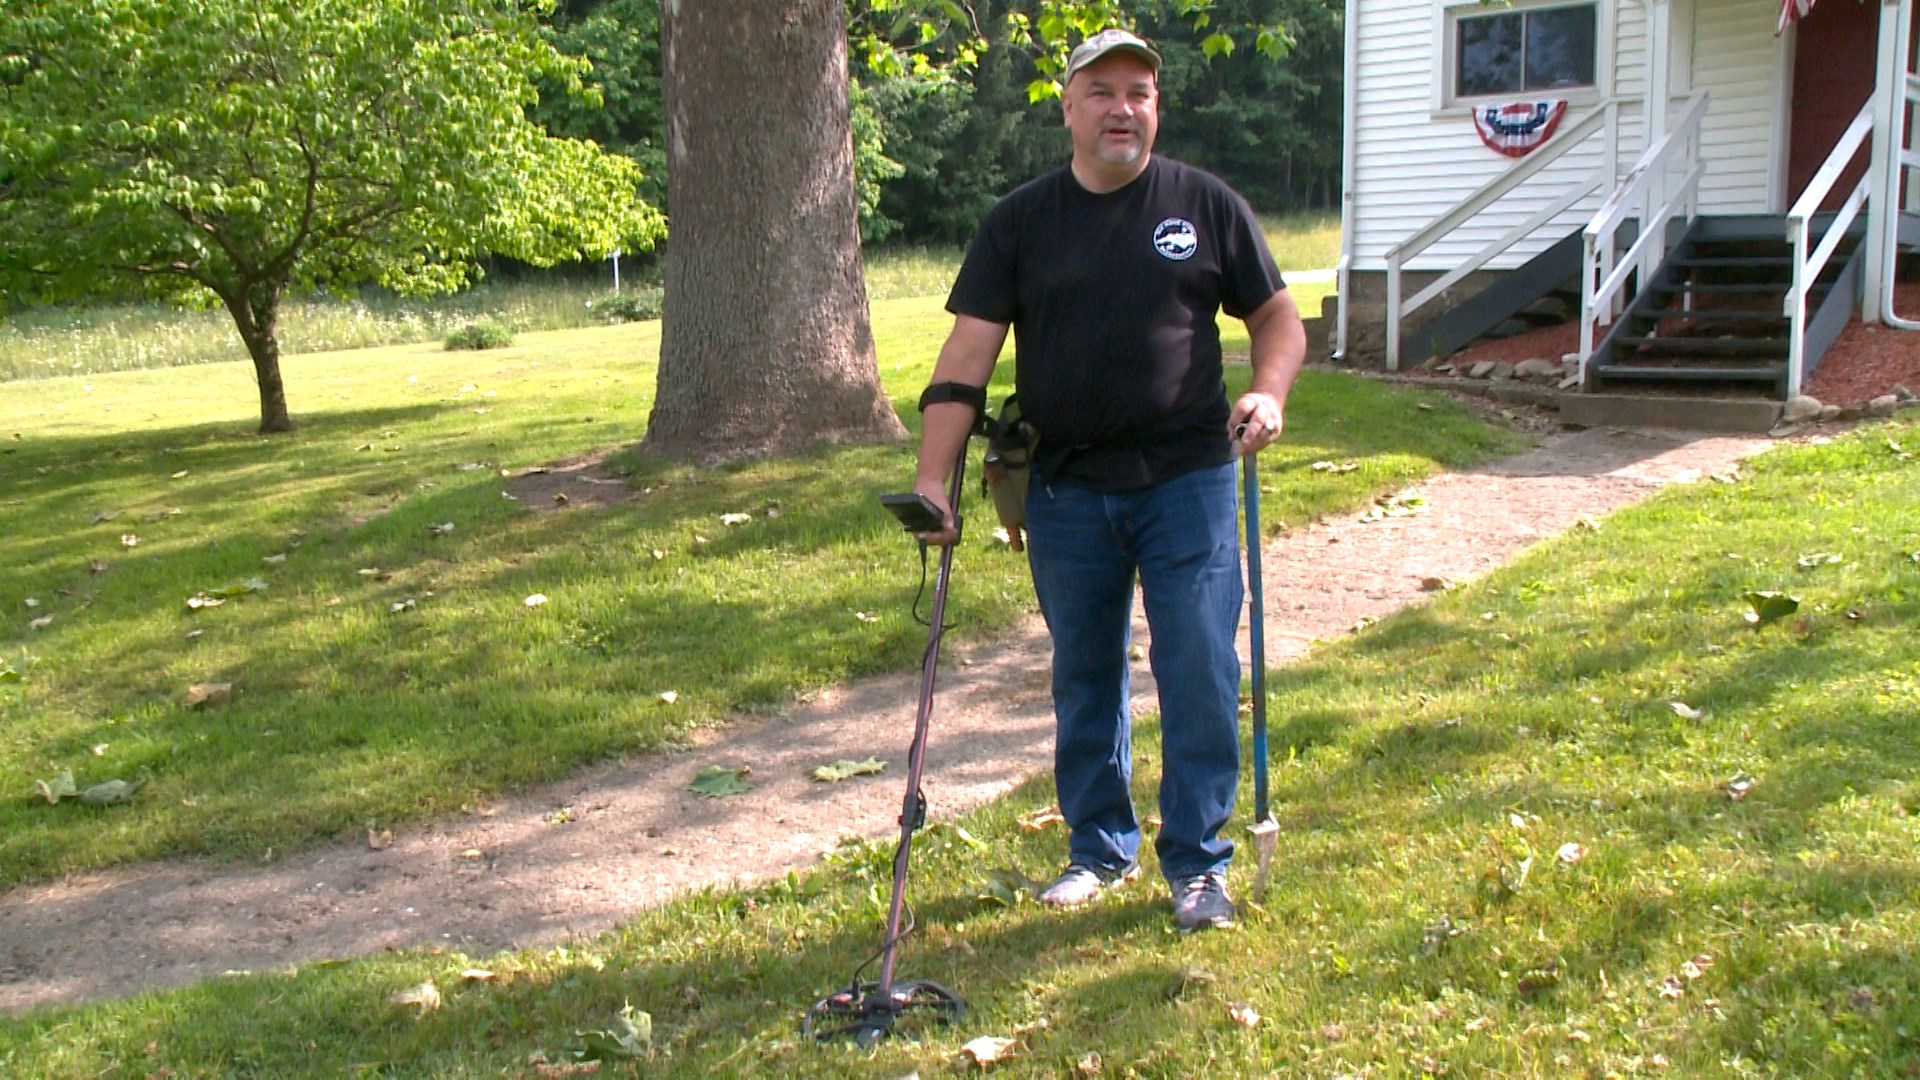 Metal Detector Finds Artifact at Old Mansion Site